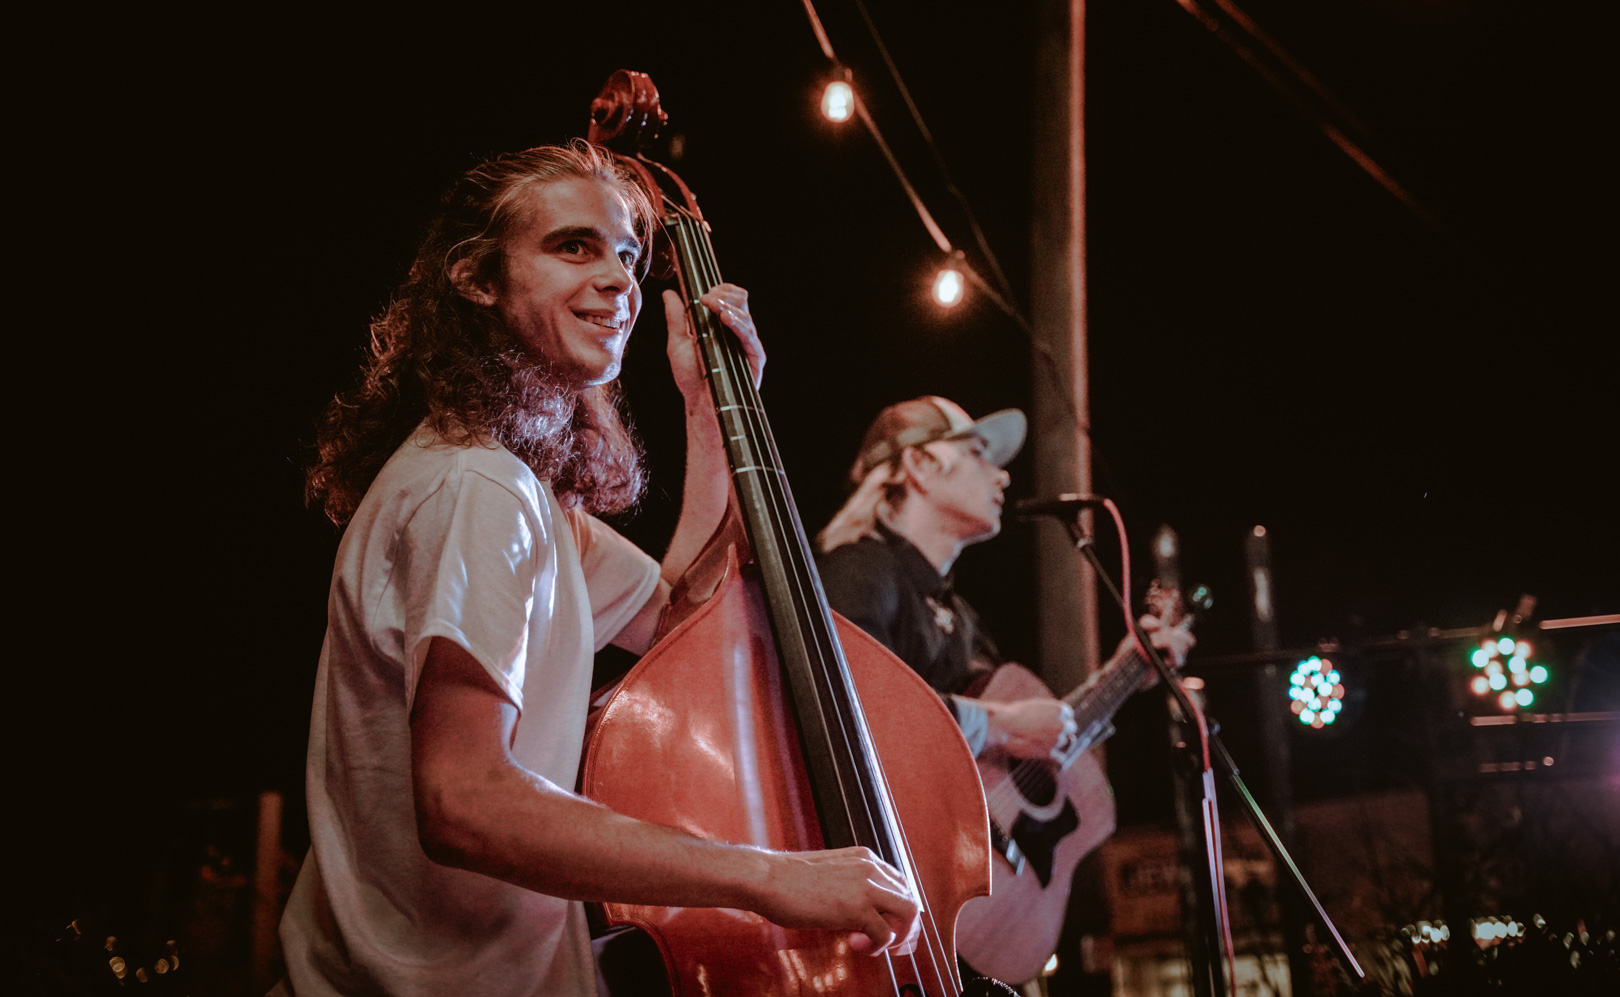 A young man playing upright bass